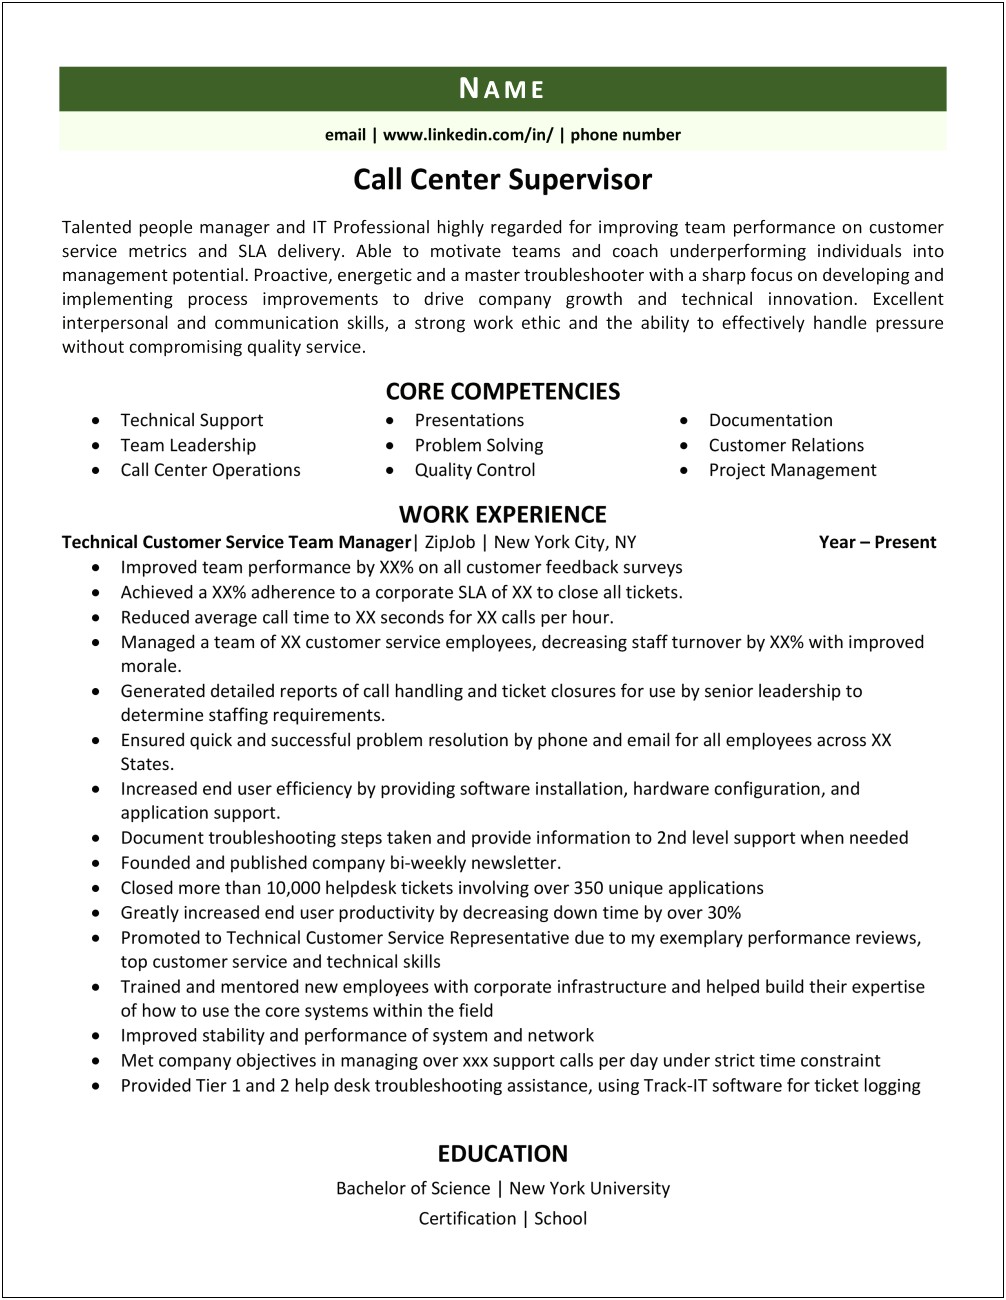 Objective Of Resume For Call Center